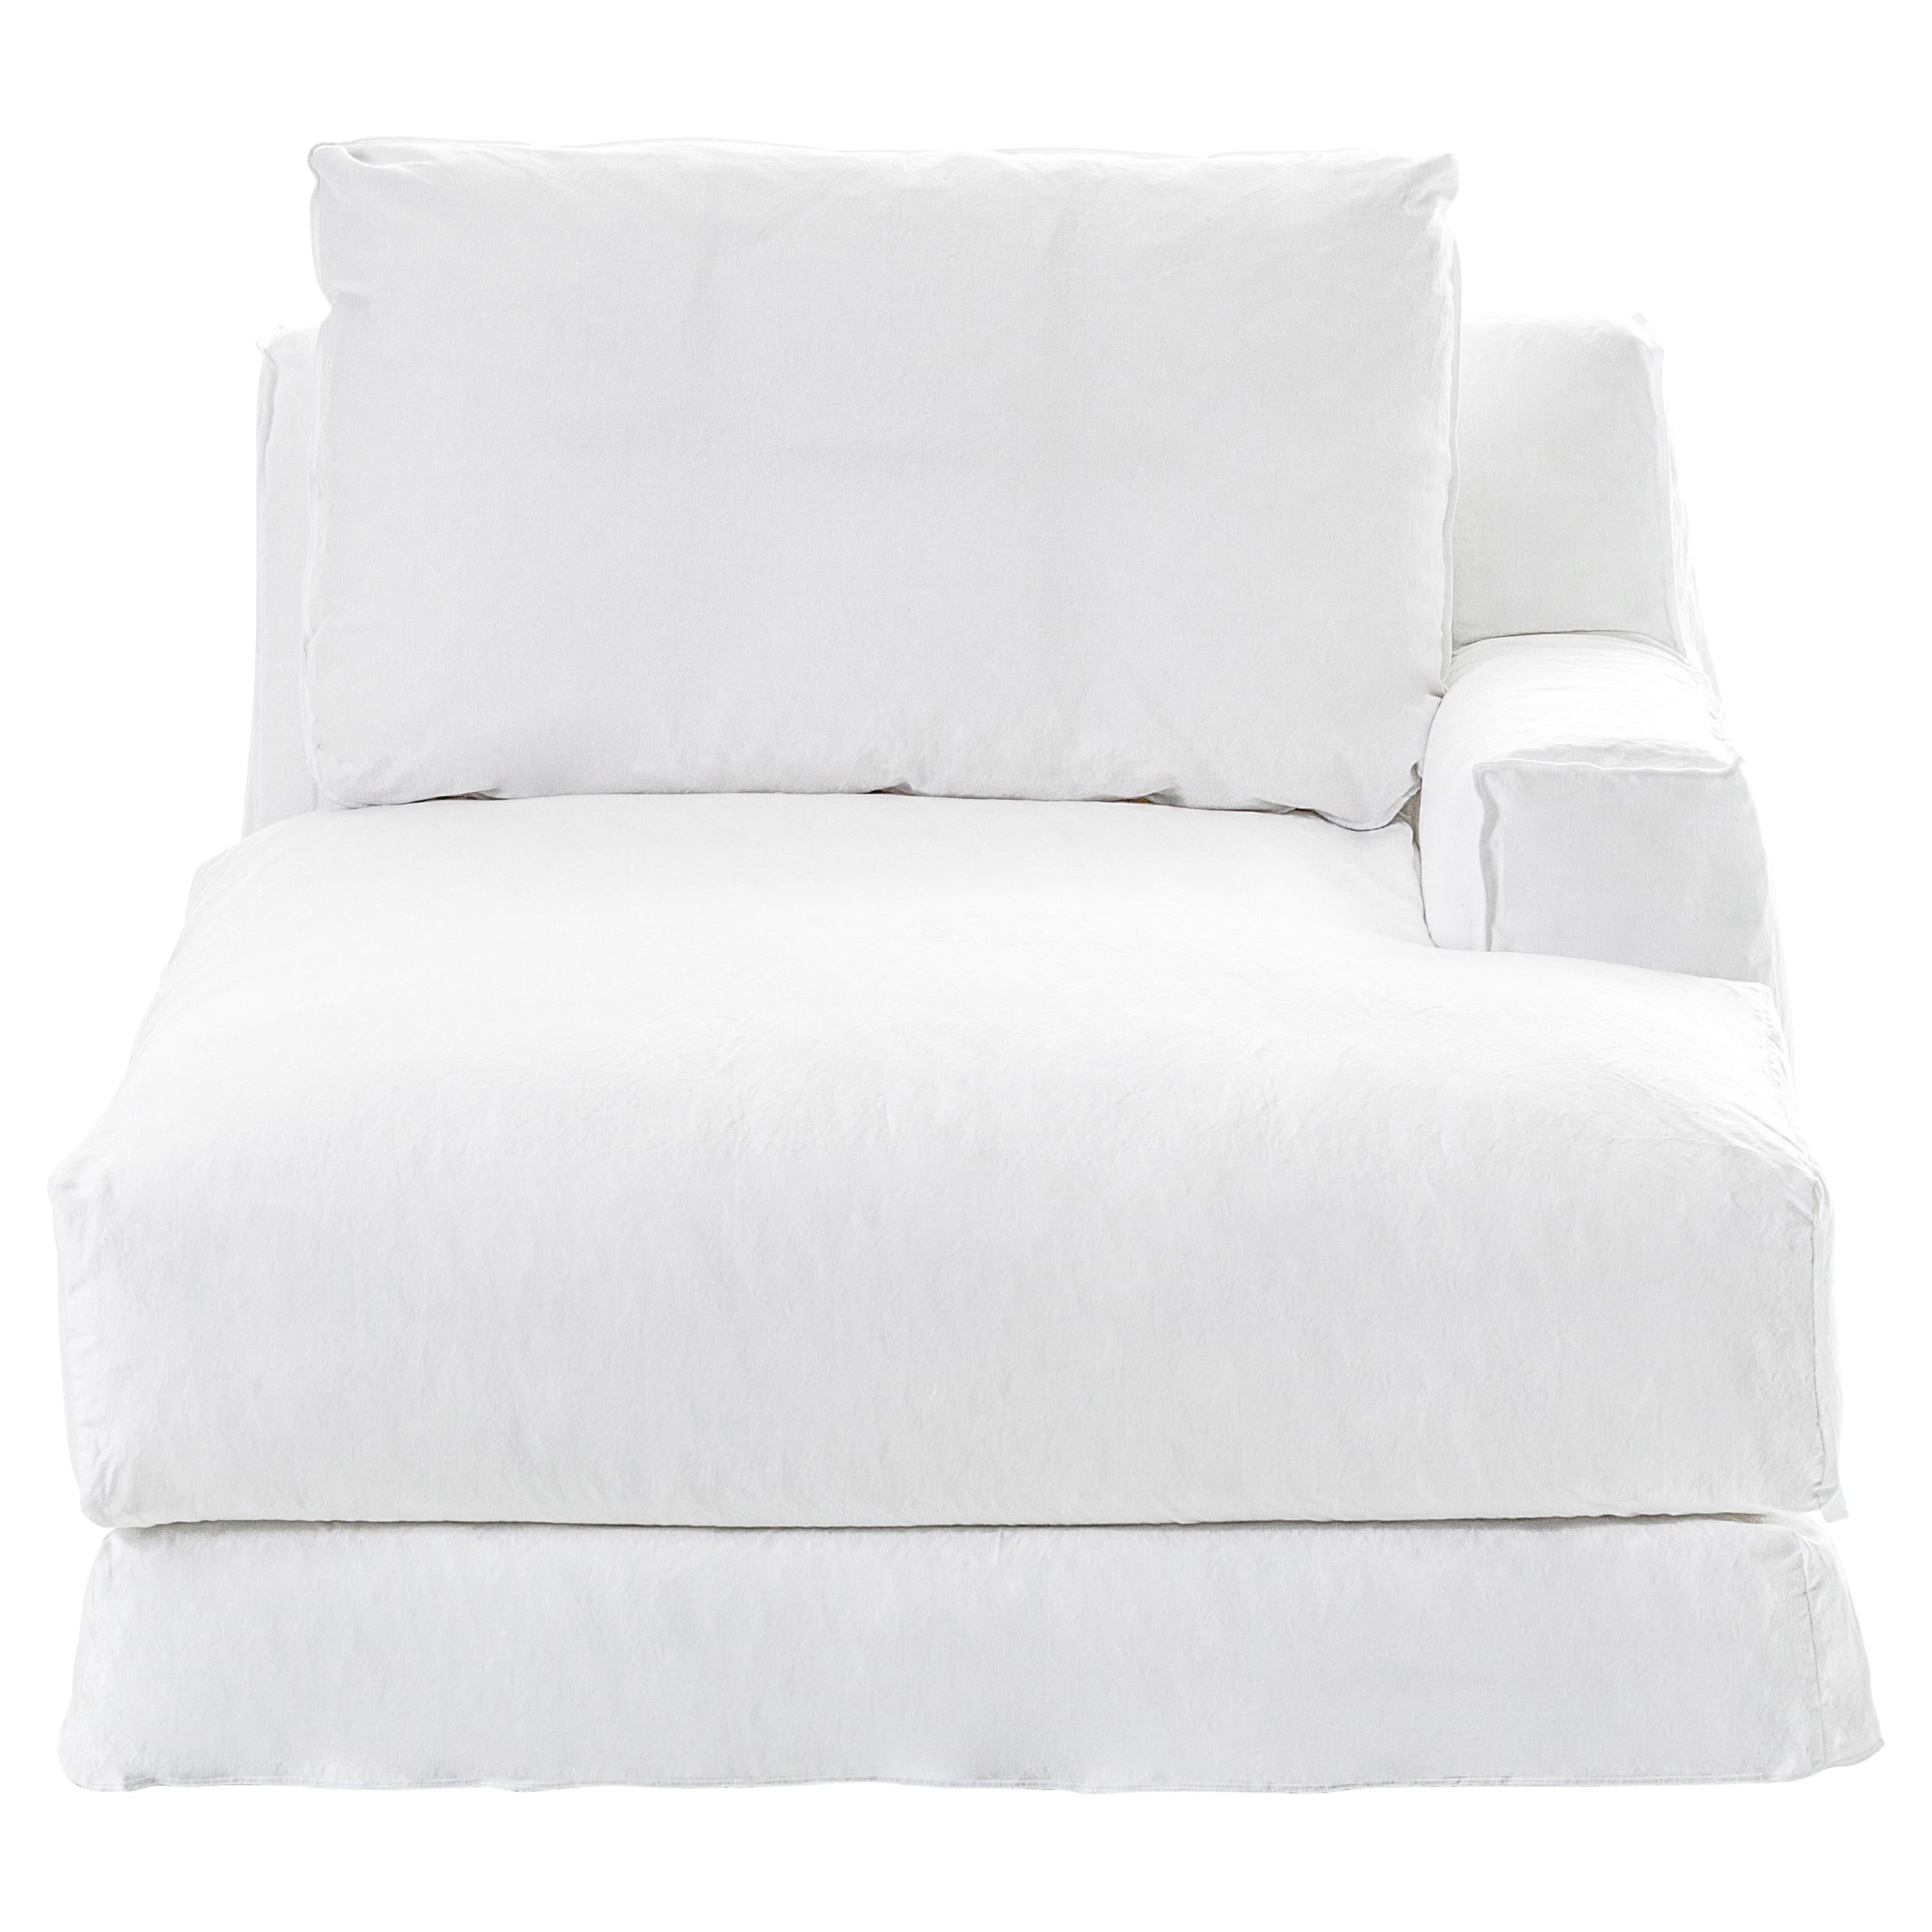 Gervasoni Loll 20 R Arm Dormeuse in White Linen Upholstery by Paola Navone For Sale